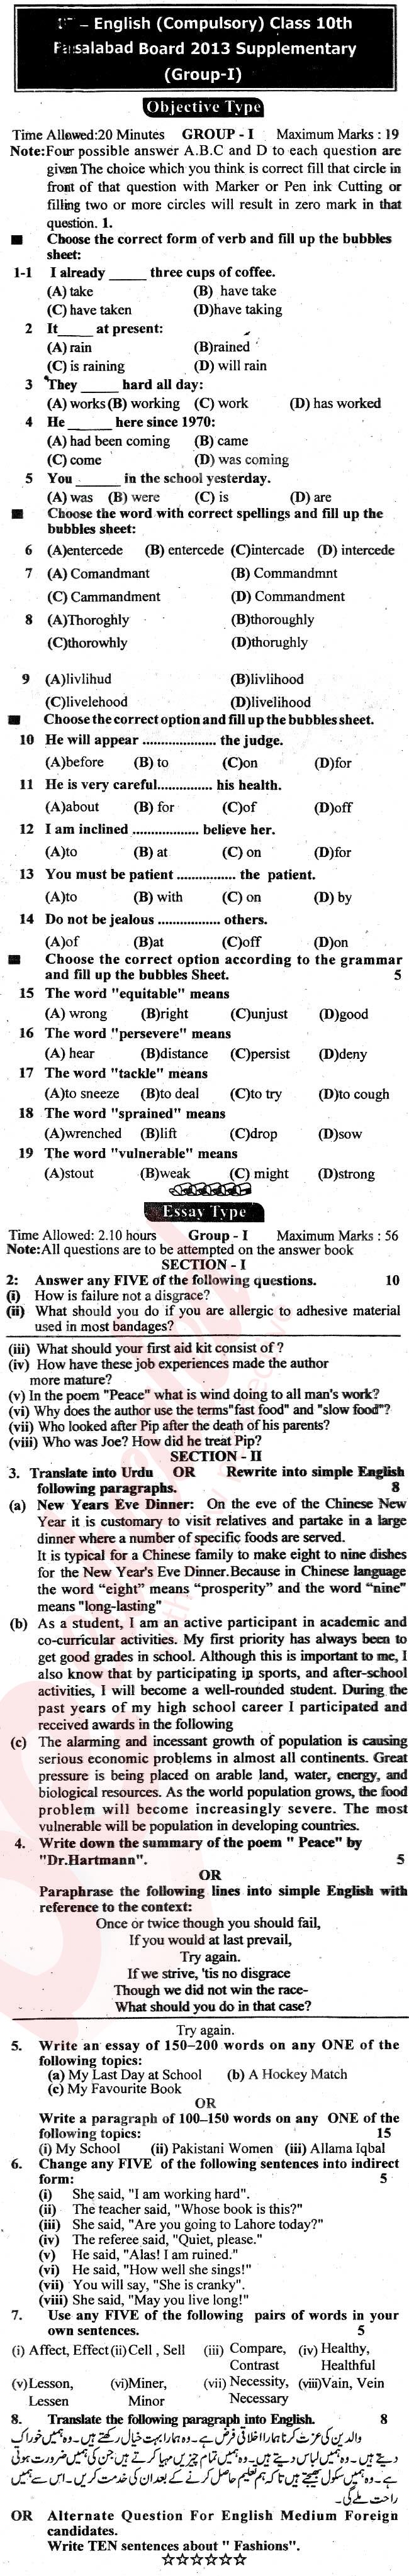 English 10th class Past Paper Group 1 BISE Faisalabad 2013